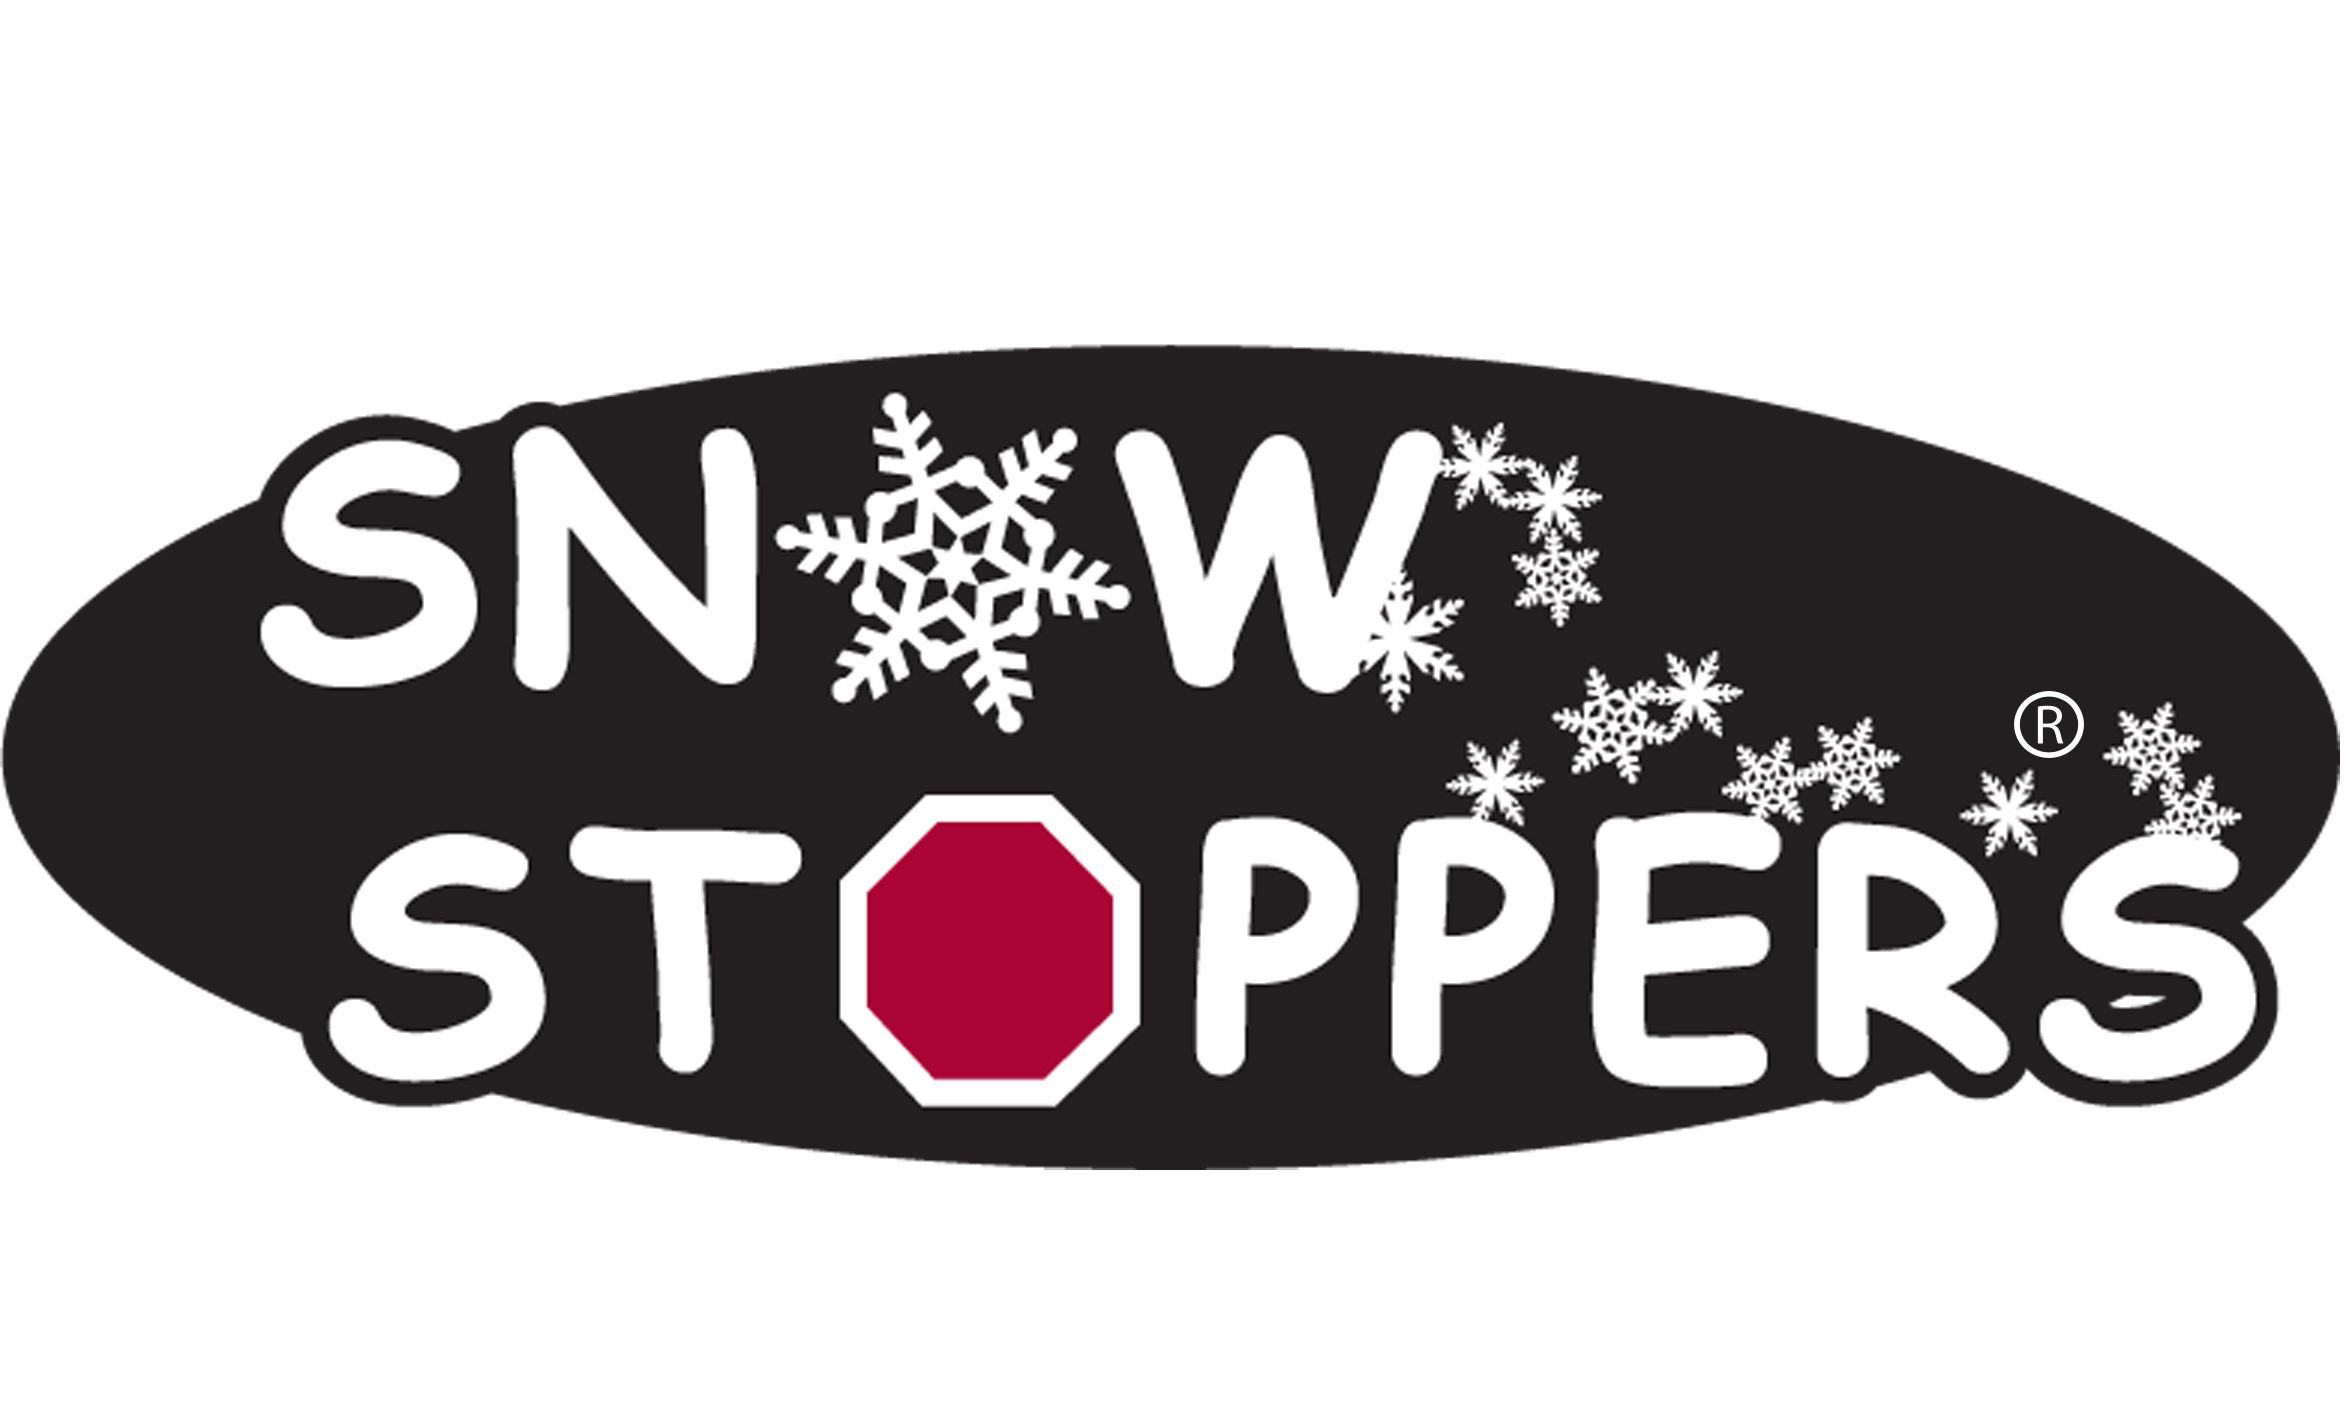 SnowStoppers